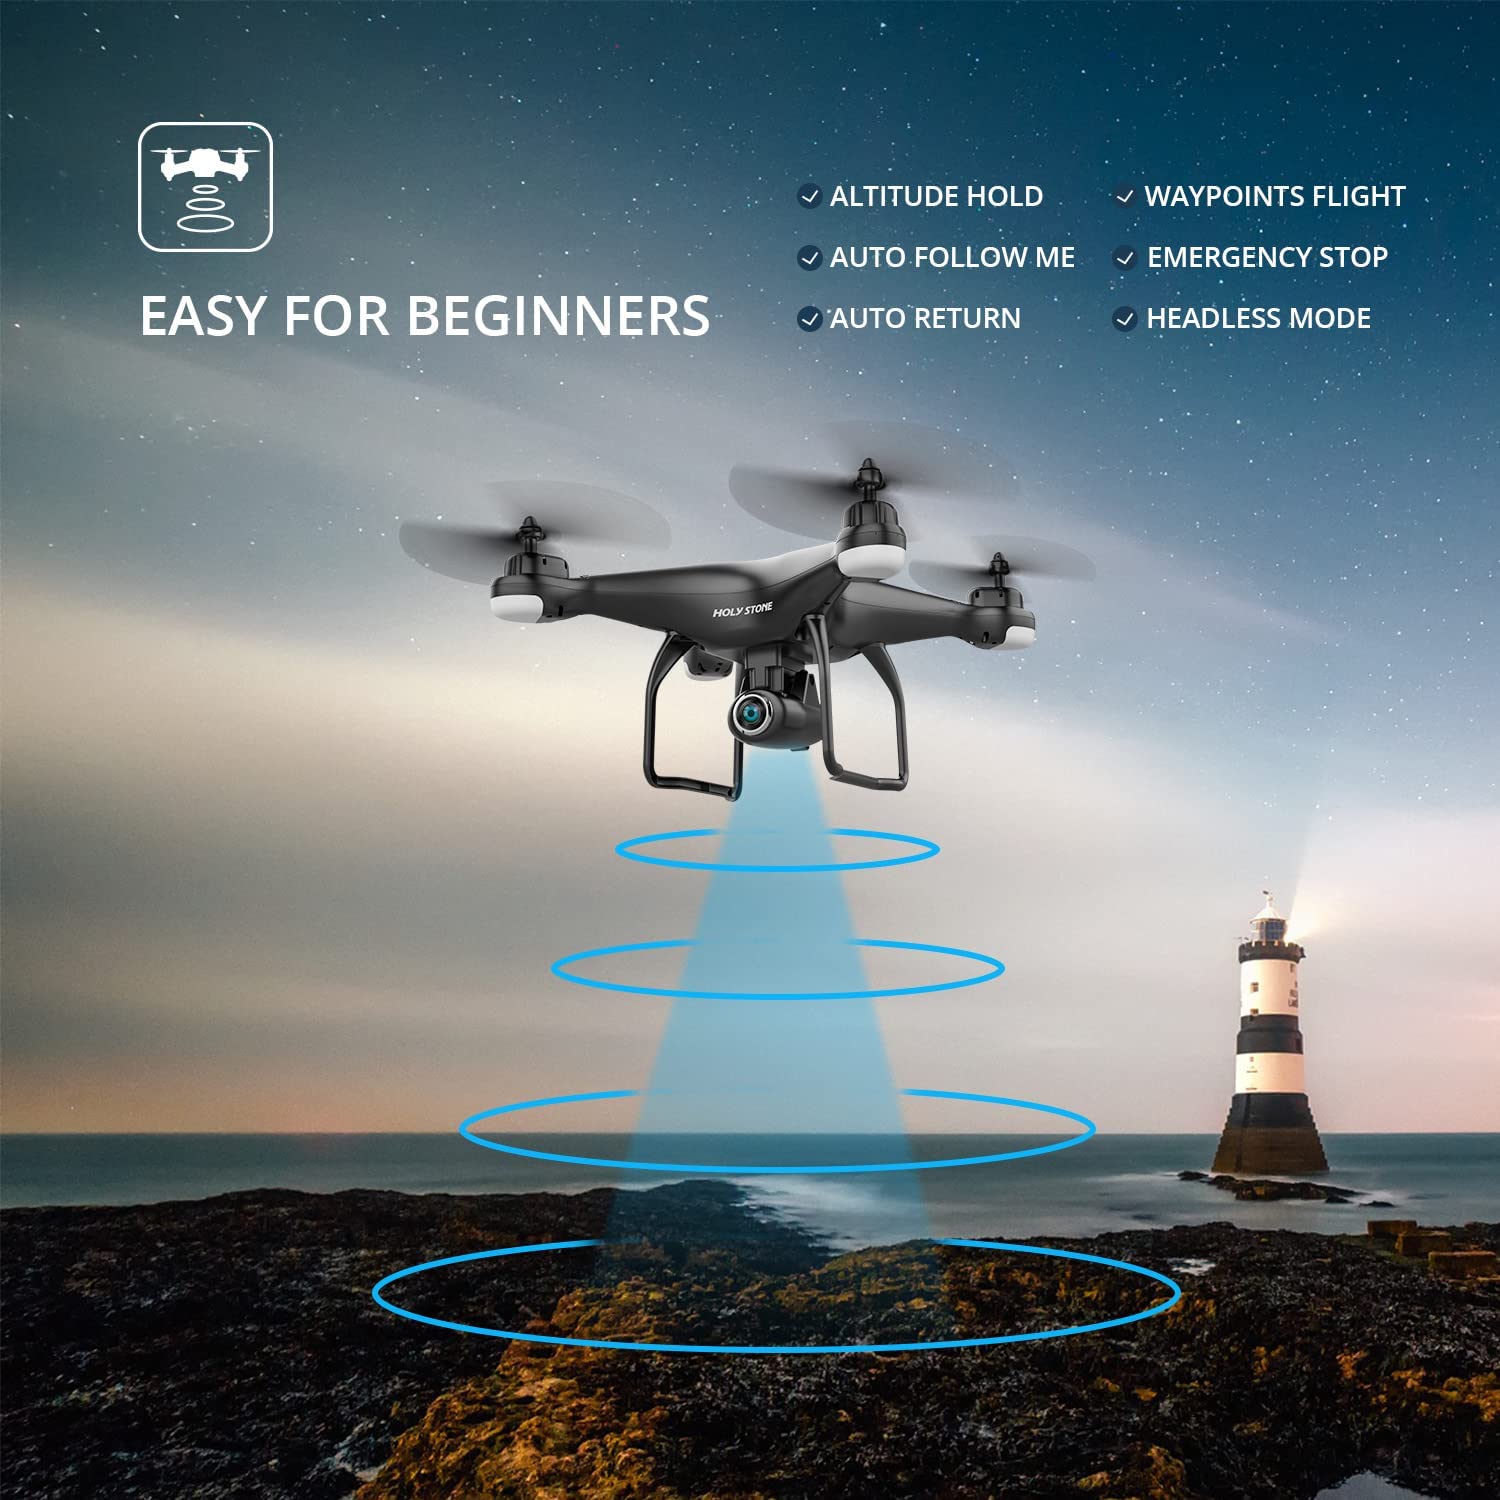 HS120D FPV Drone with GPS System